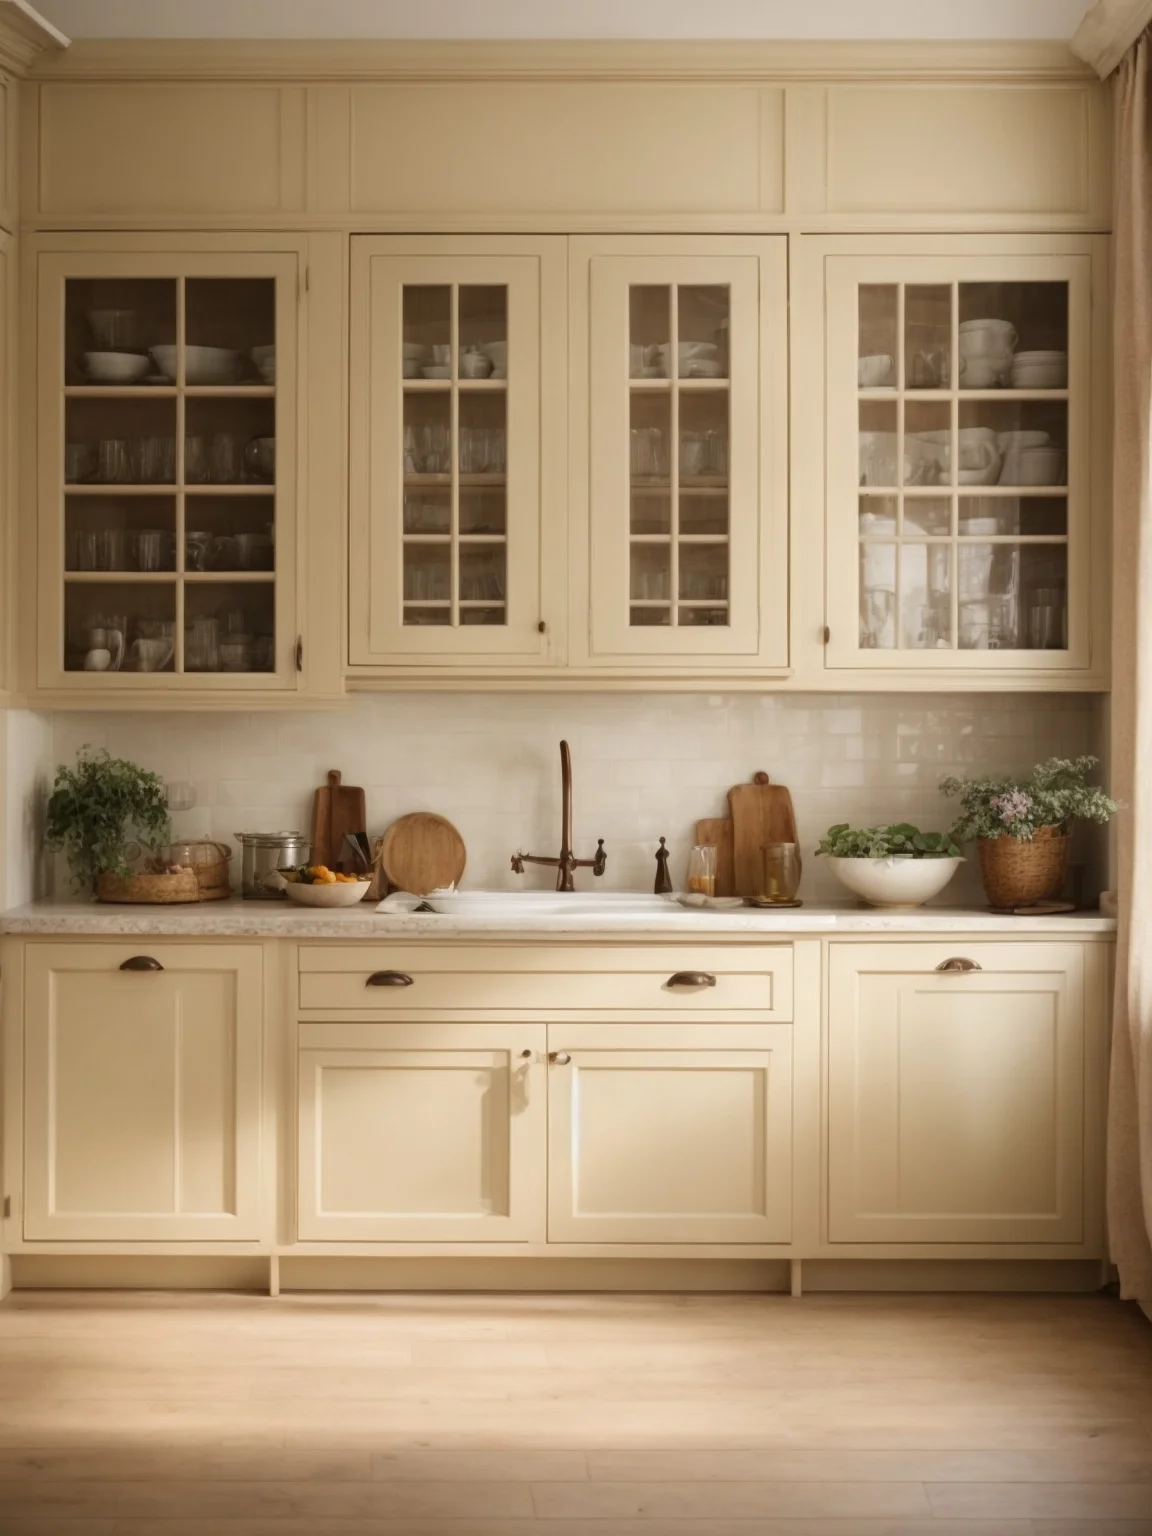 neutral kitchen wall colors with cream cabinets